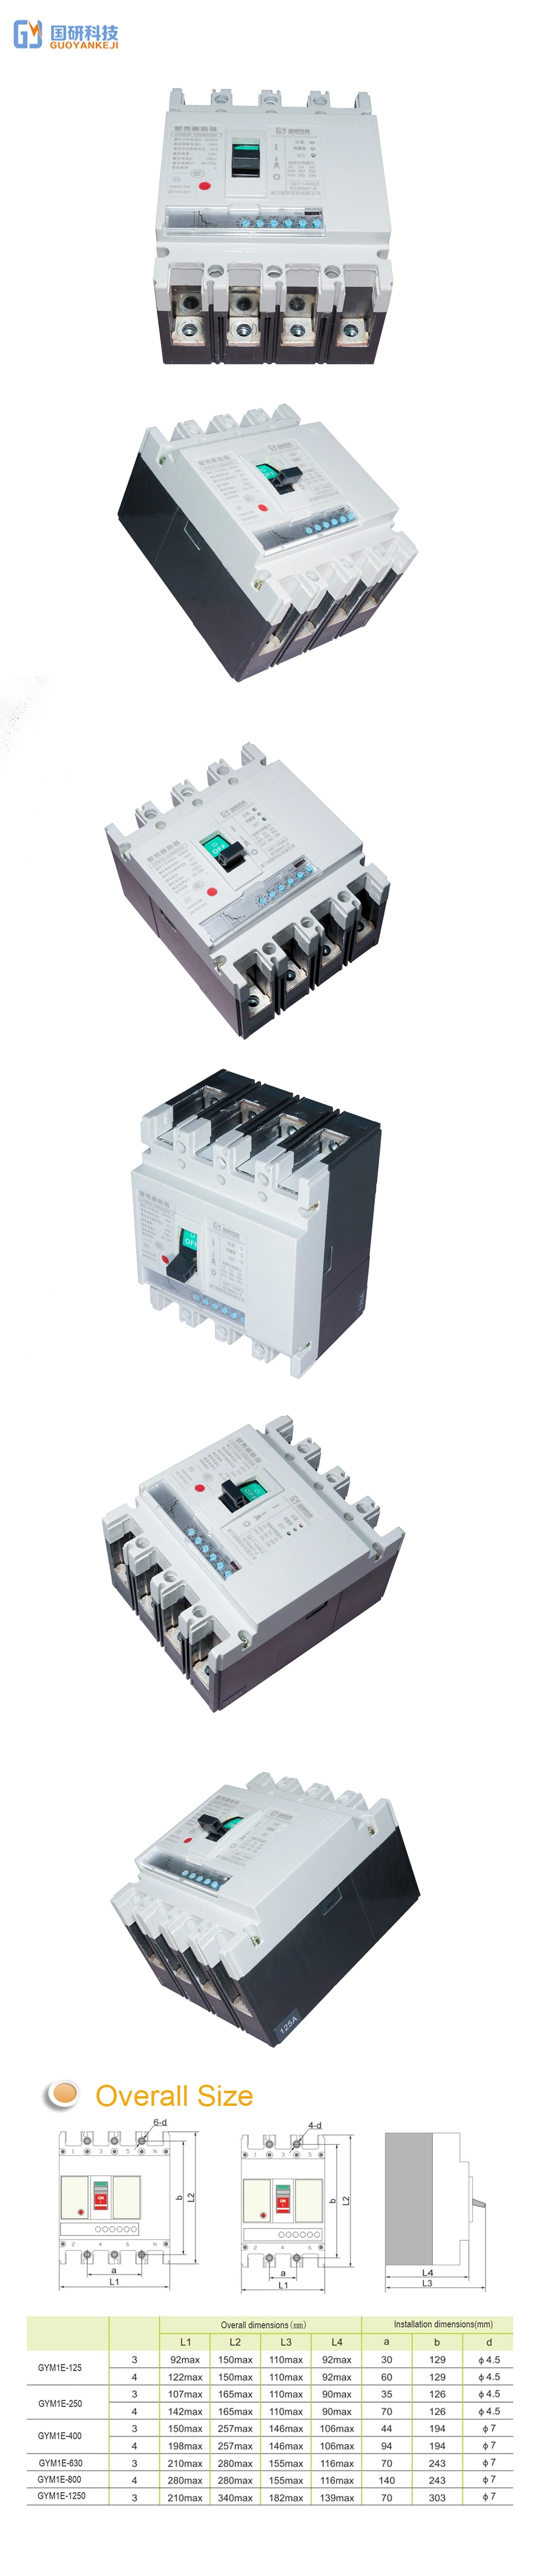 Gym1e-125 40A 3 Phase Moulded Case Circuit Breaker MCCB with Kema Ce CB Certification